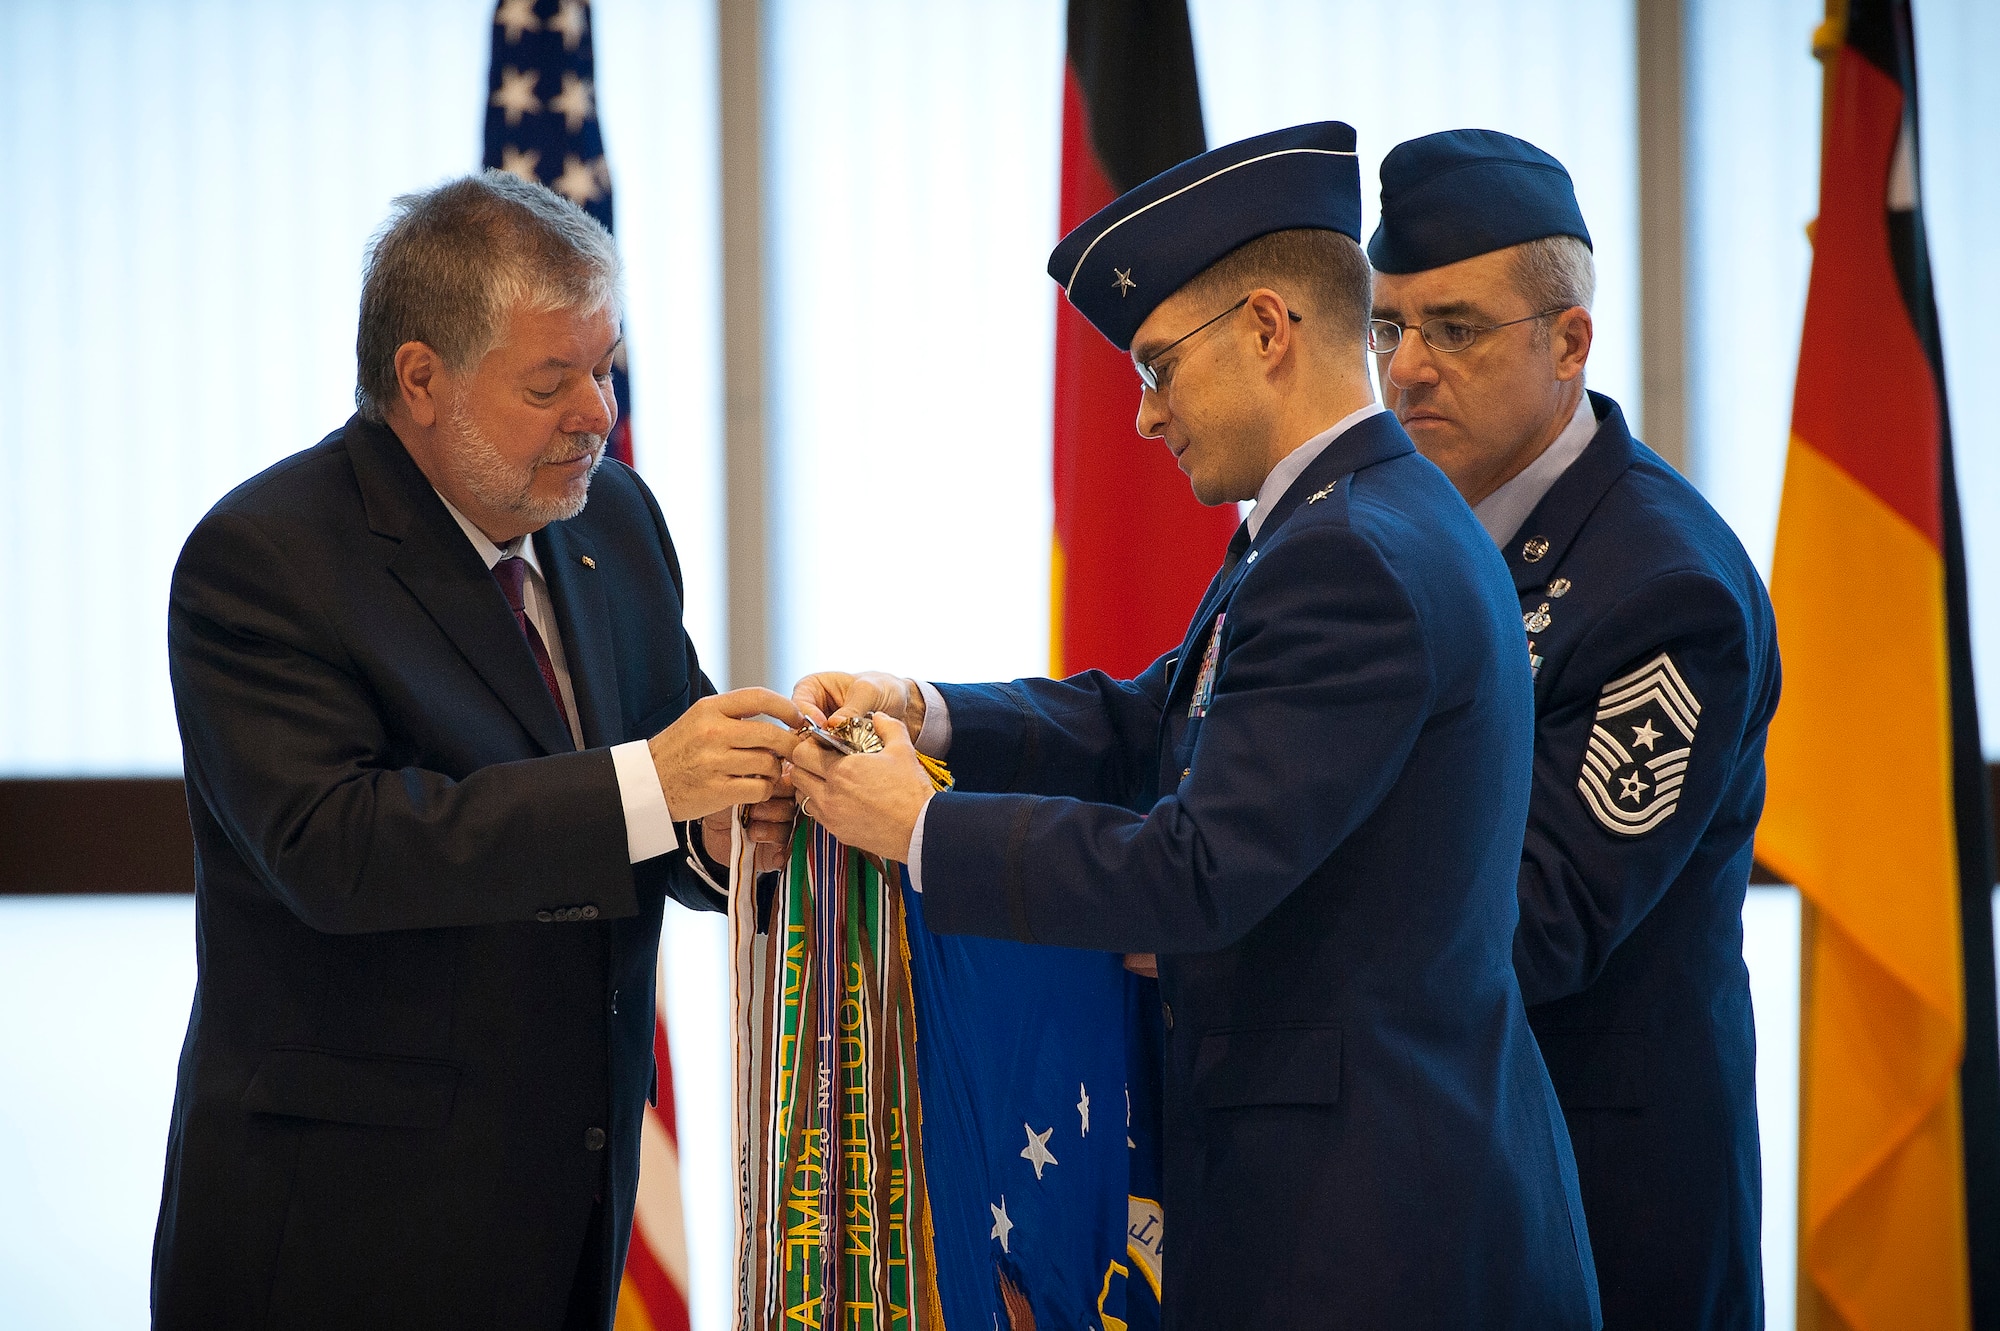 Minister President Kurt Beck, Reinland-Pfalz, and Brig. Gen. C.K. Hyde, 86th Airlift Wing commander, attach a 60th anniversary streamer during the anniversary celebration, Ramstein Air Base, Germany, March 02, 2012. Reinland-Pfalz has become a second home for many American service members and civilians. The celebration of 60 years of U.S. military members in Reinland-Pfalz provides an opportunity to reflect on our enduring relationship with the German host nation. (U.S. Air Force photo by Senior Airman Stephen J. Otero)